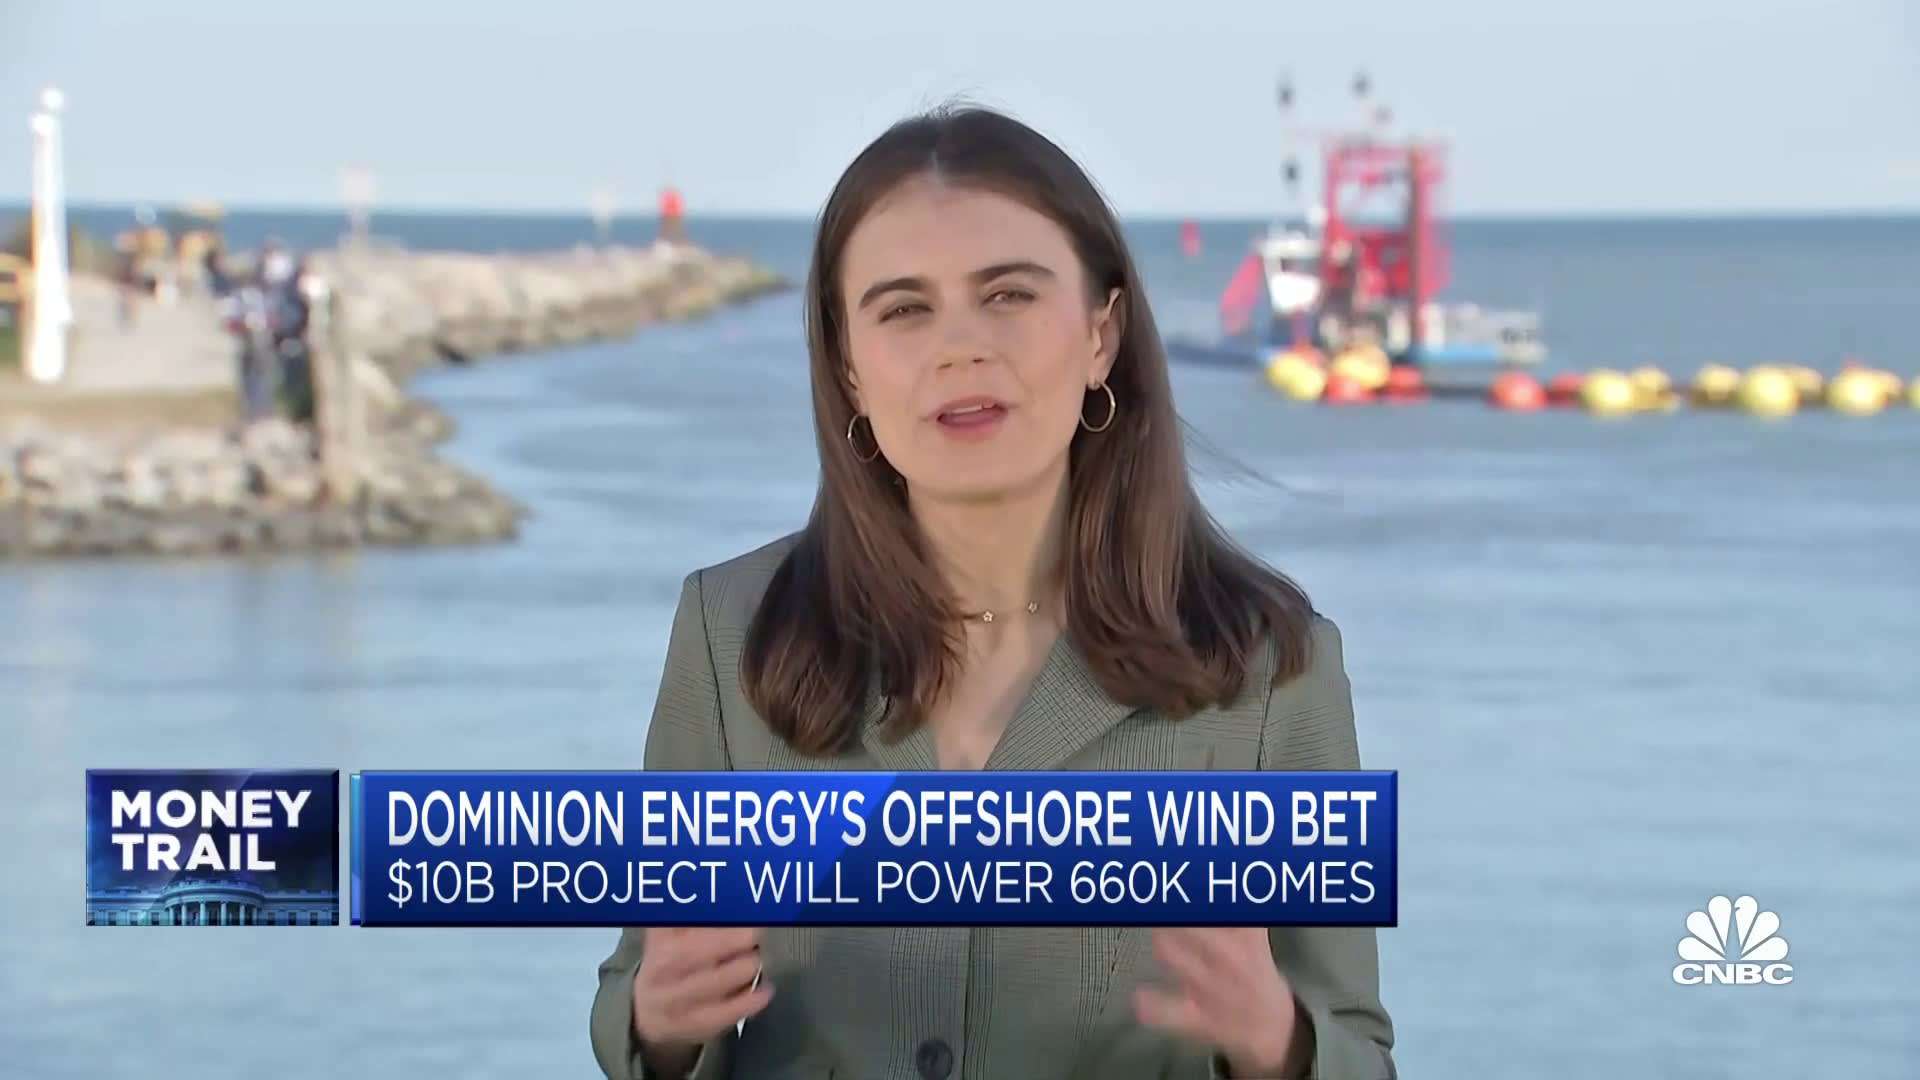 Dominion Energy's offshore wind bet: What you need to know